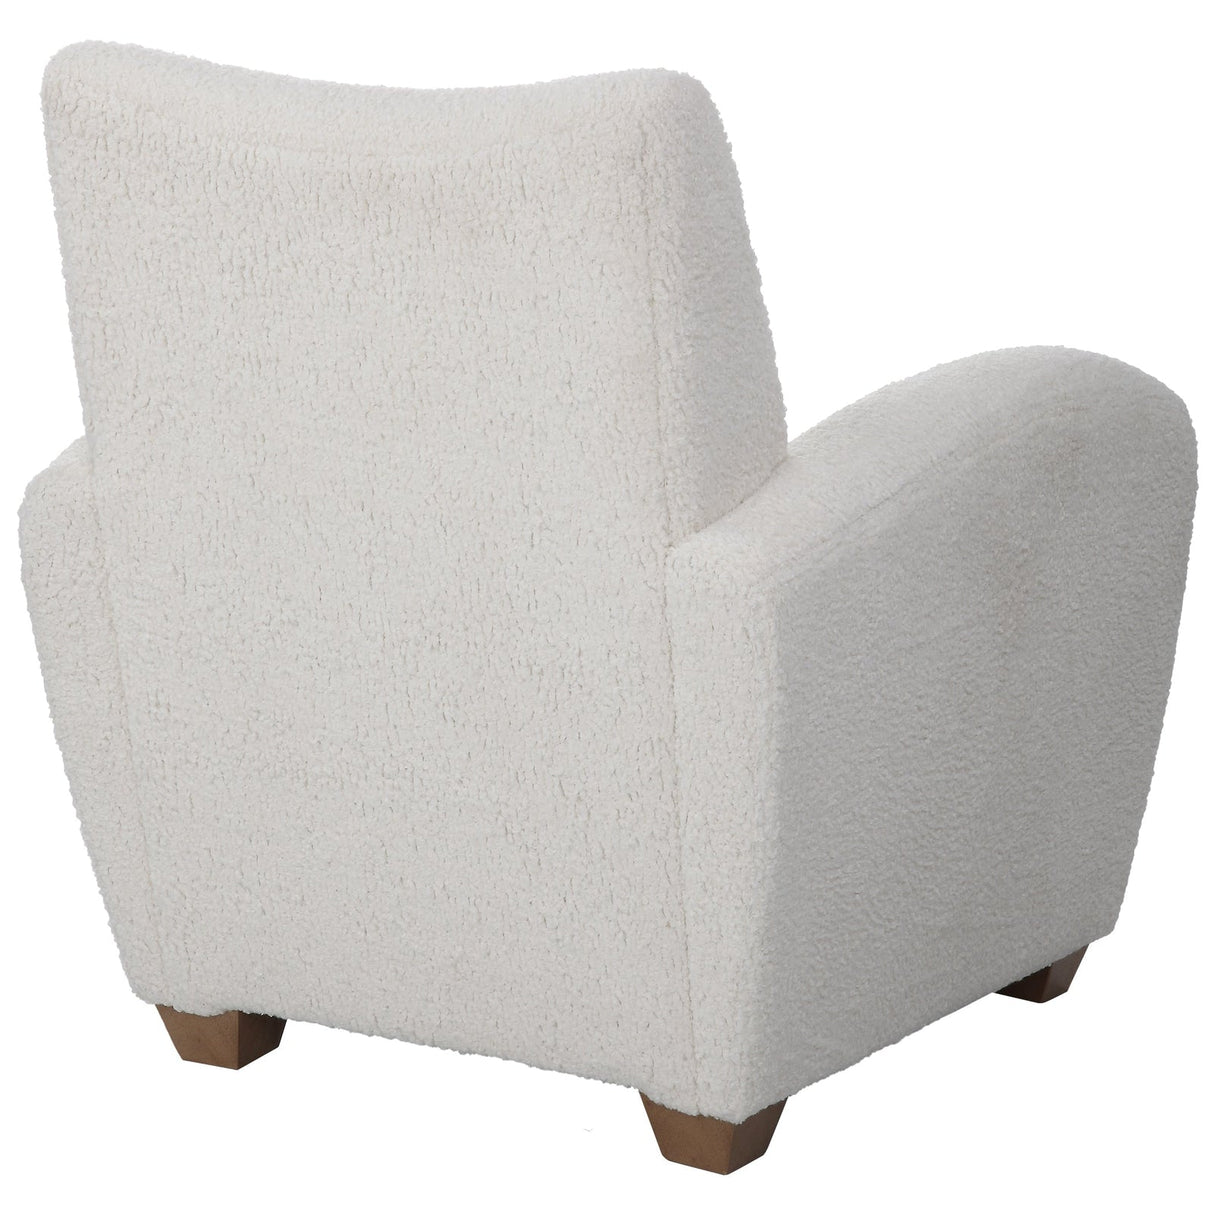 Uttermost Teddy White Shearling Accent Chair - Home Elegance USA